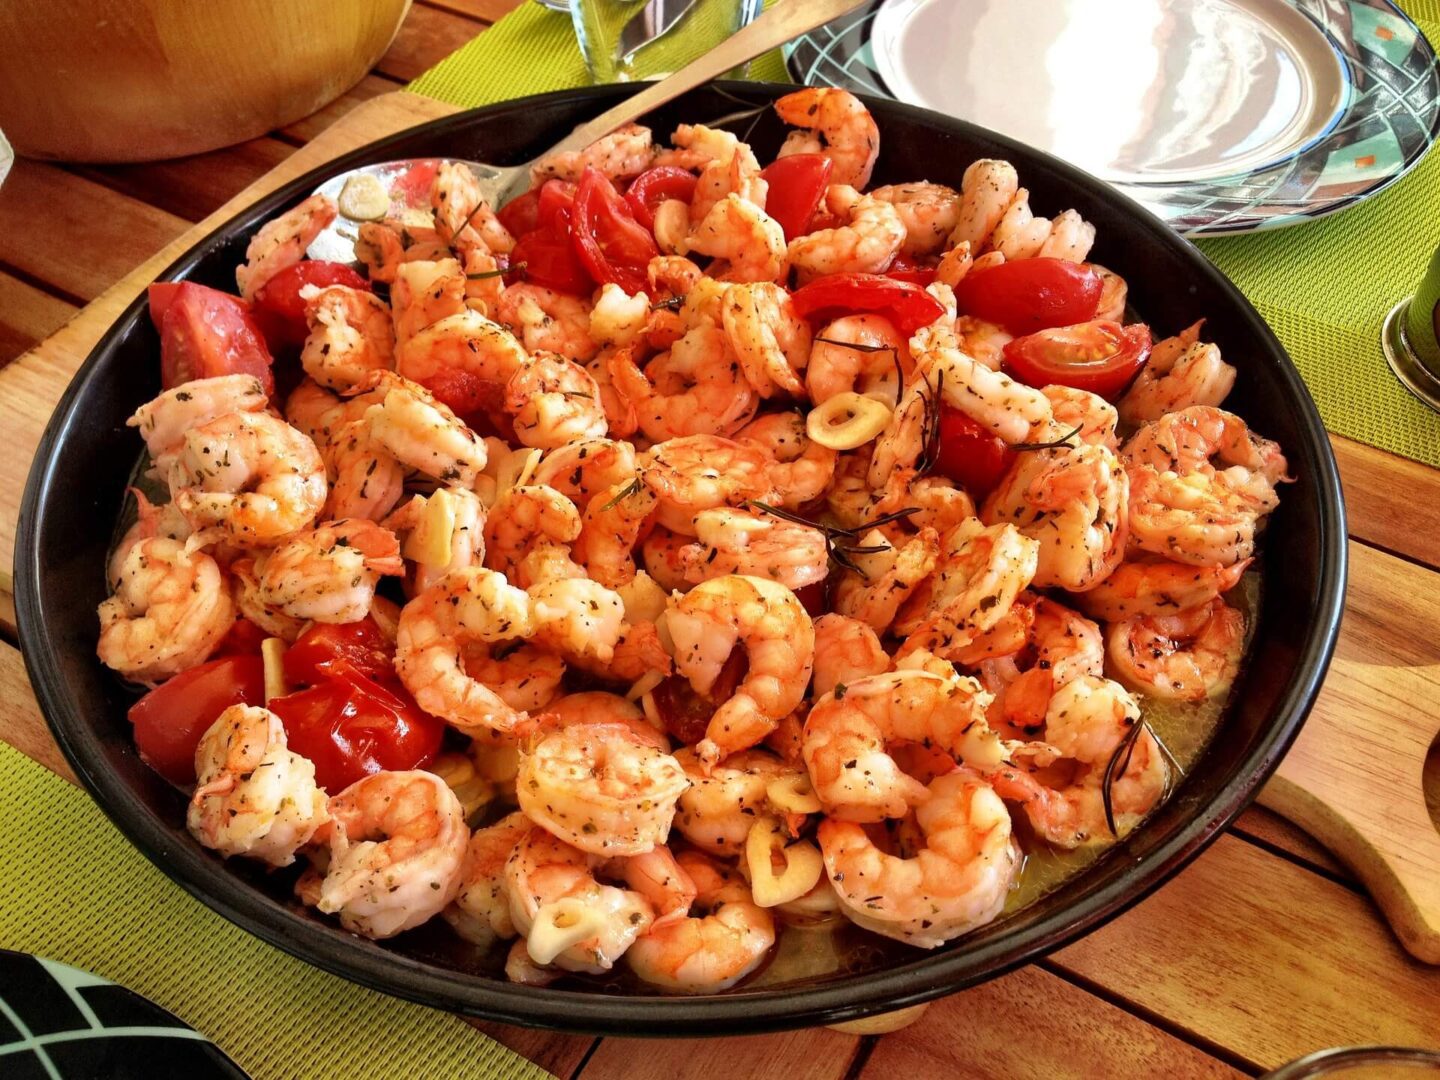 A pan of shrimp and tomatoes on the table.